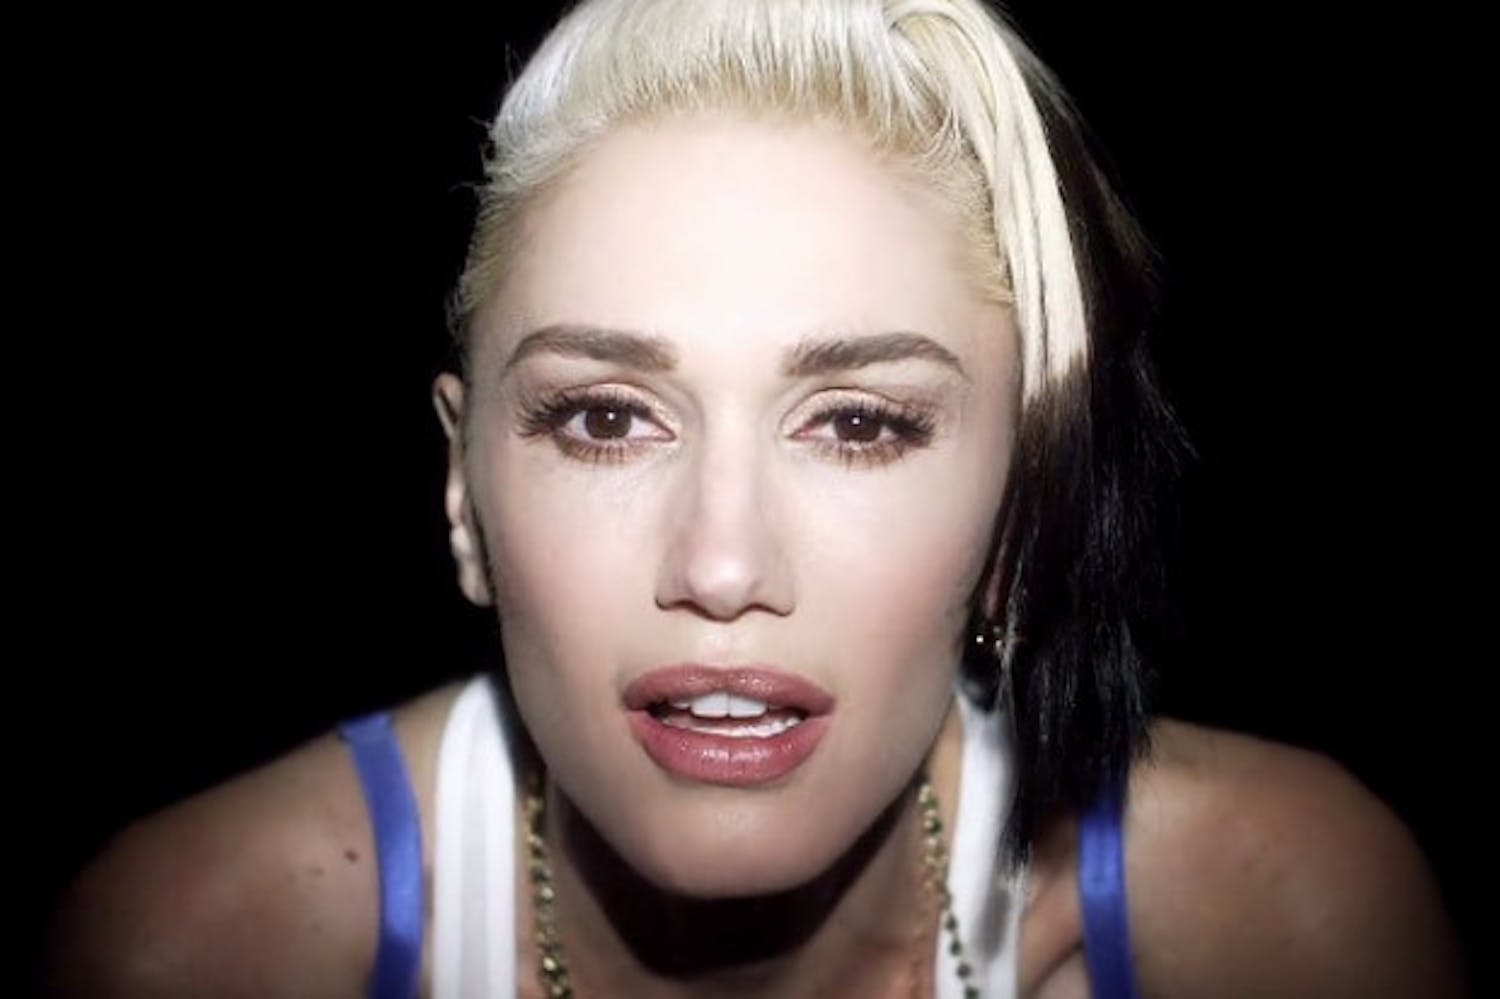 gwen-stefani-used-to-love-you-video-102015-1